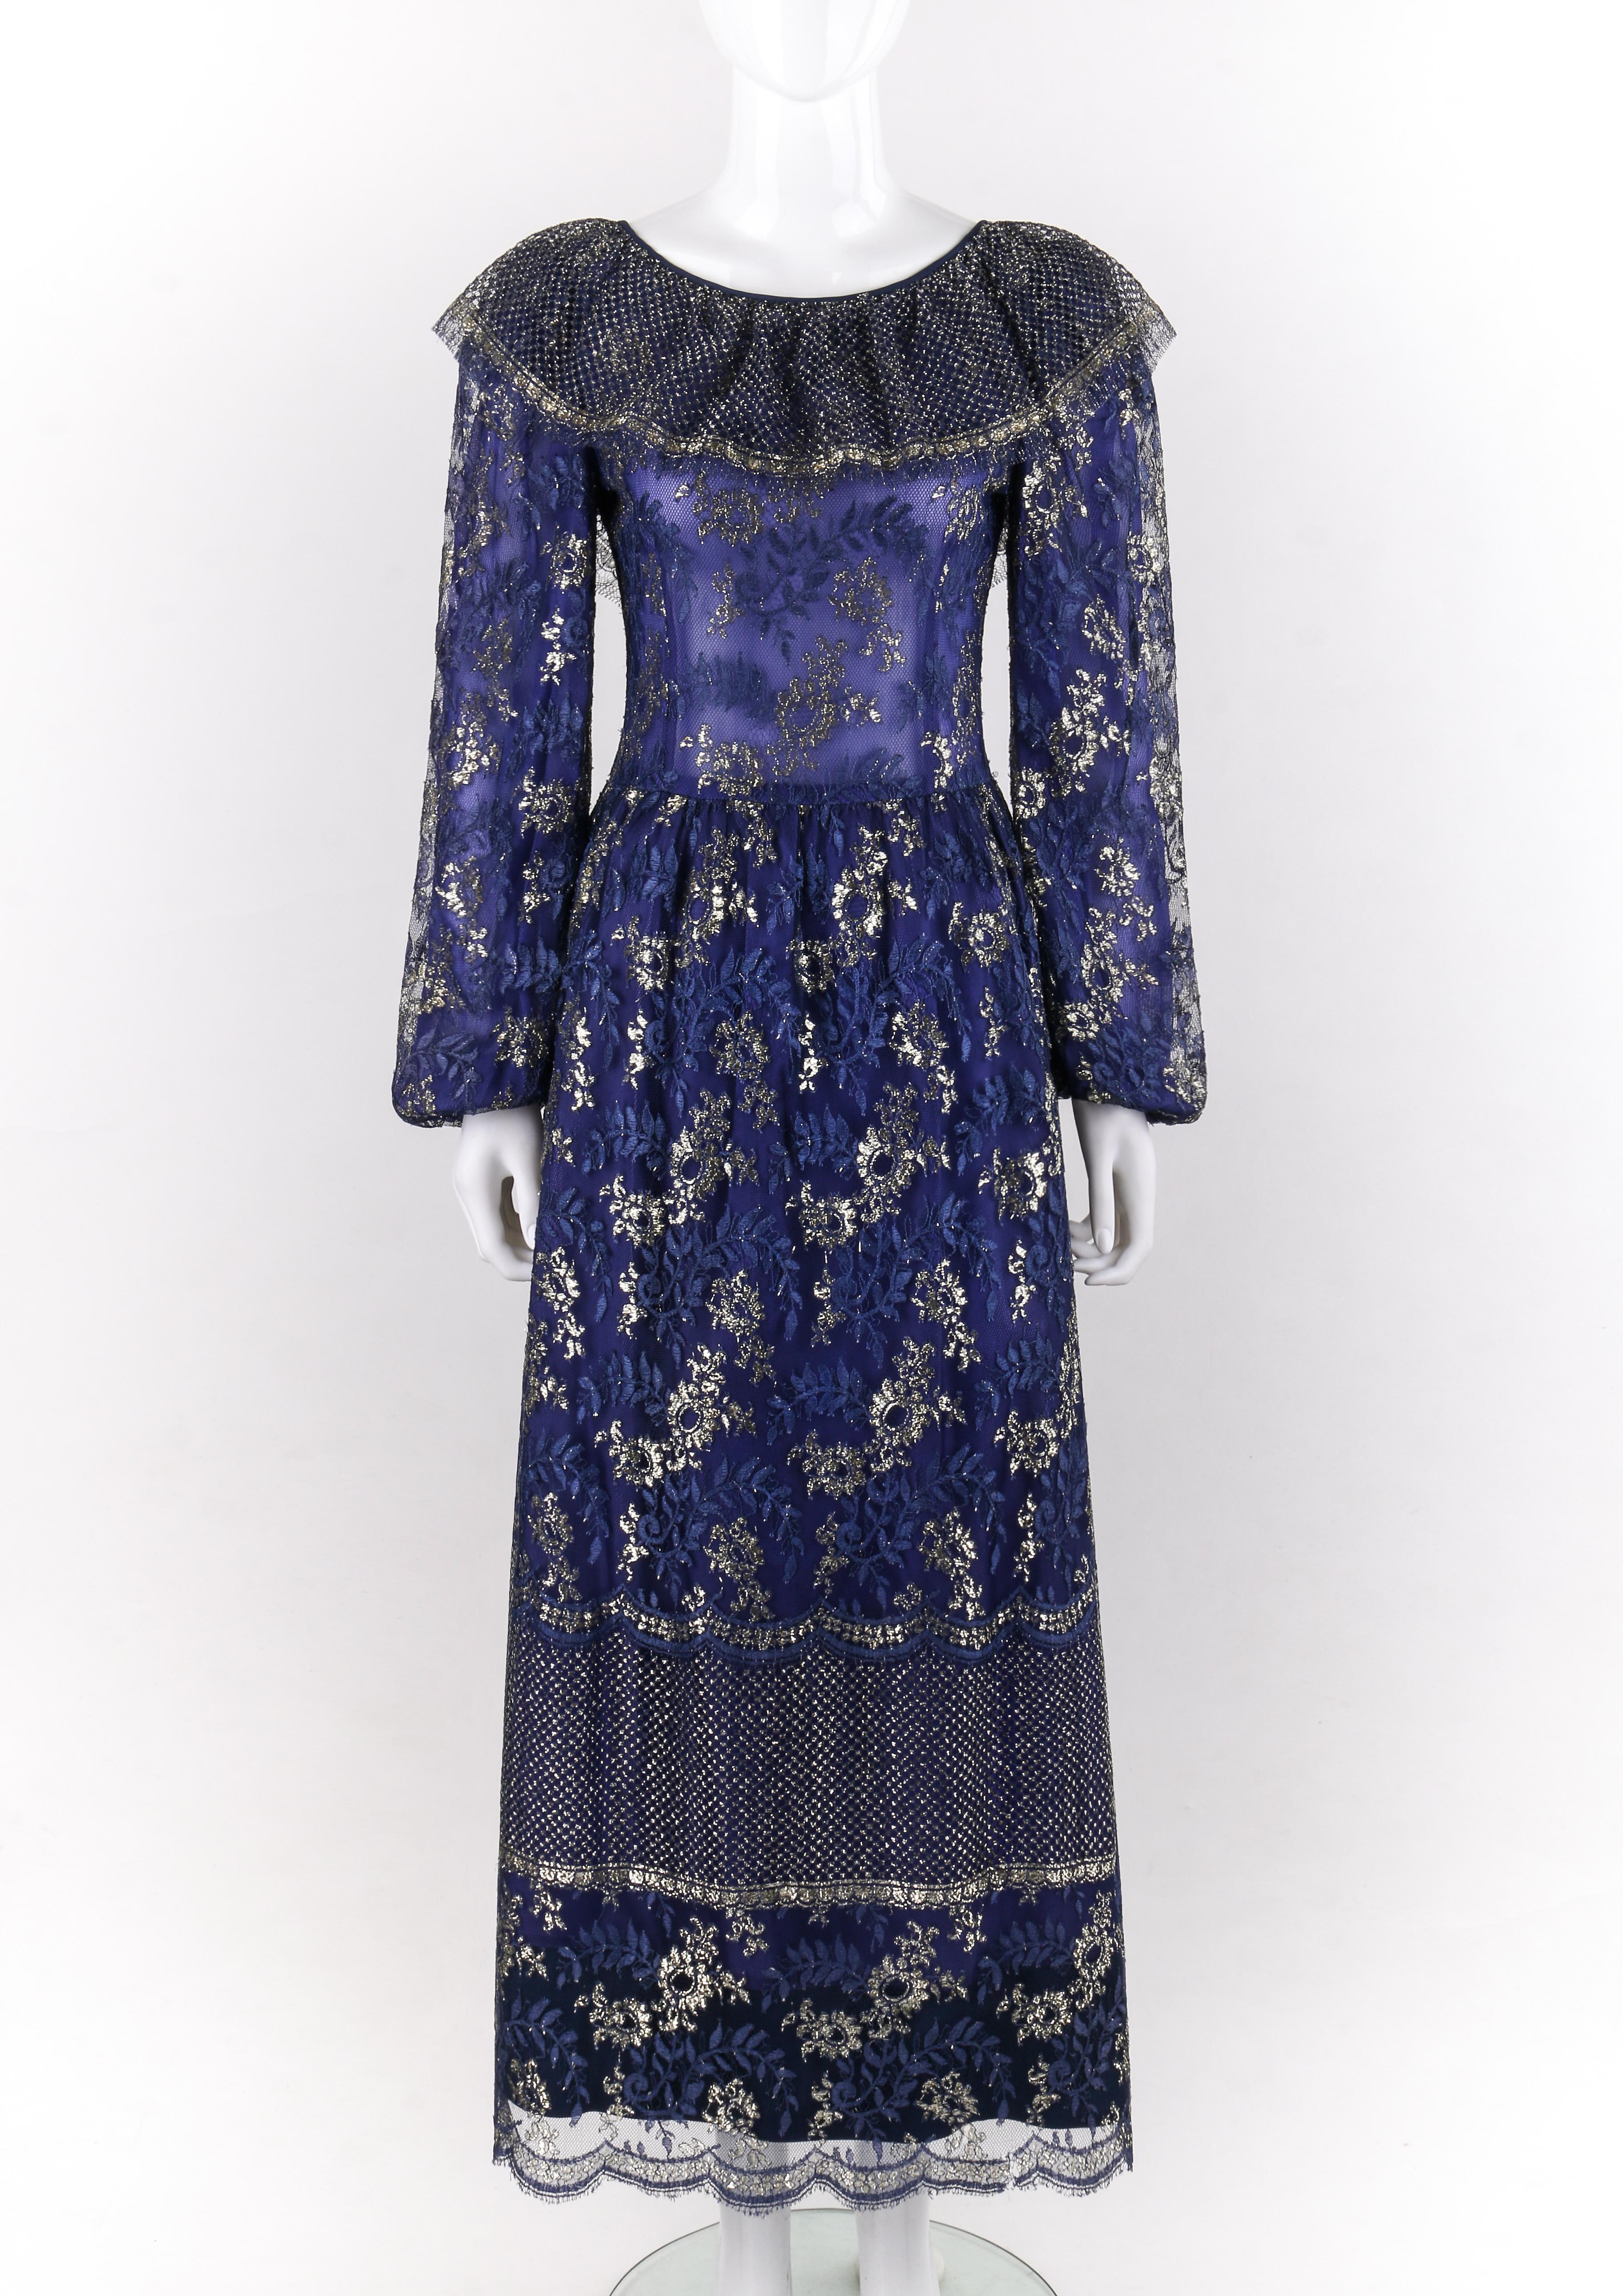 LANVIN Haute Couture c.1970s Periwinkle Gold Floral Lace Overlay Maxi Dress
 
Circa: 1970’s
Label(s): Lanvin (couture #10268)
Designer: Jules-Francois Crahay
Style: Evening gown / dress
Color(s): Shades of blue / purple (exterior, interior); gold